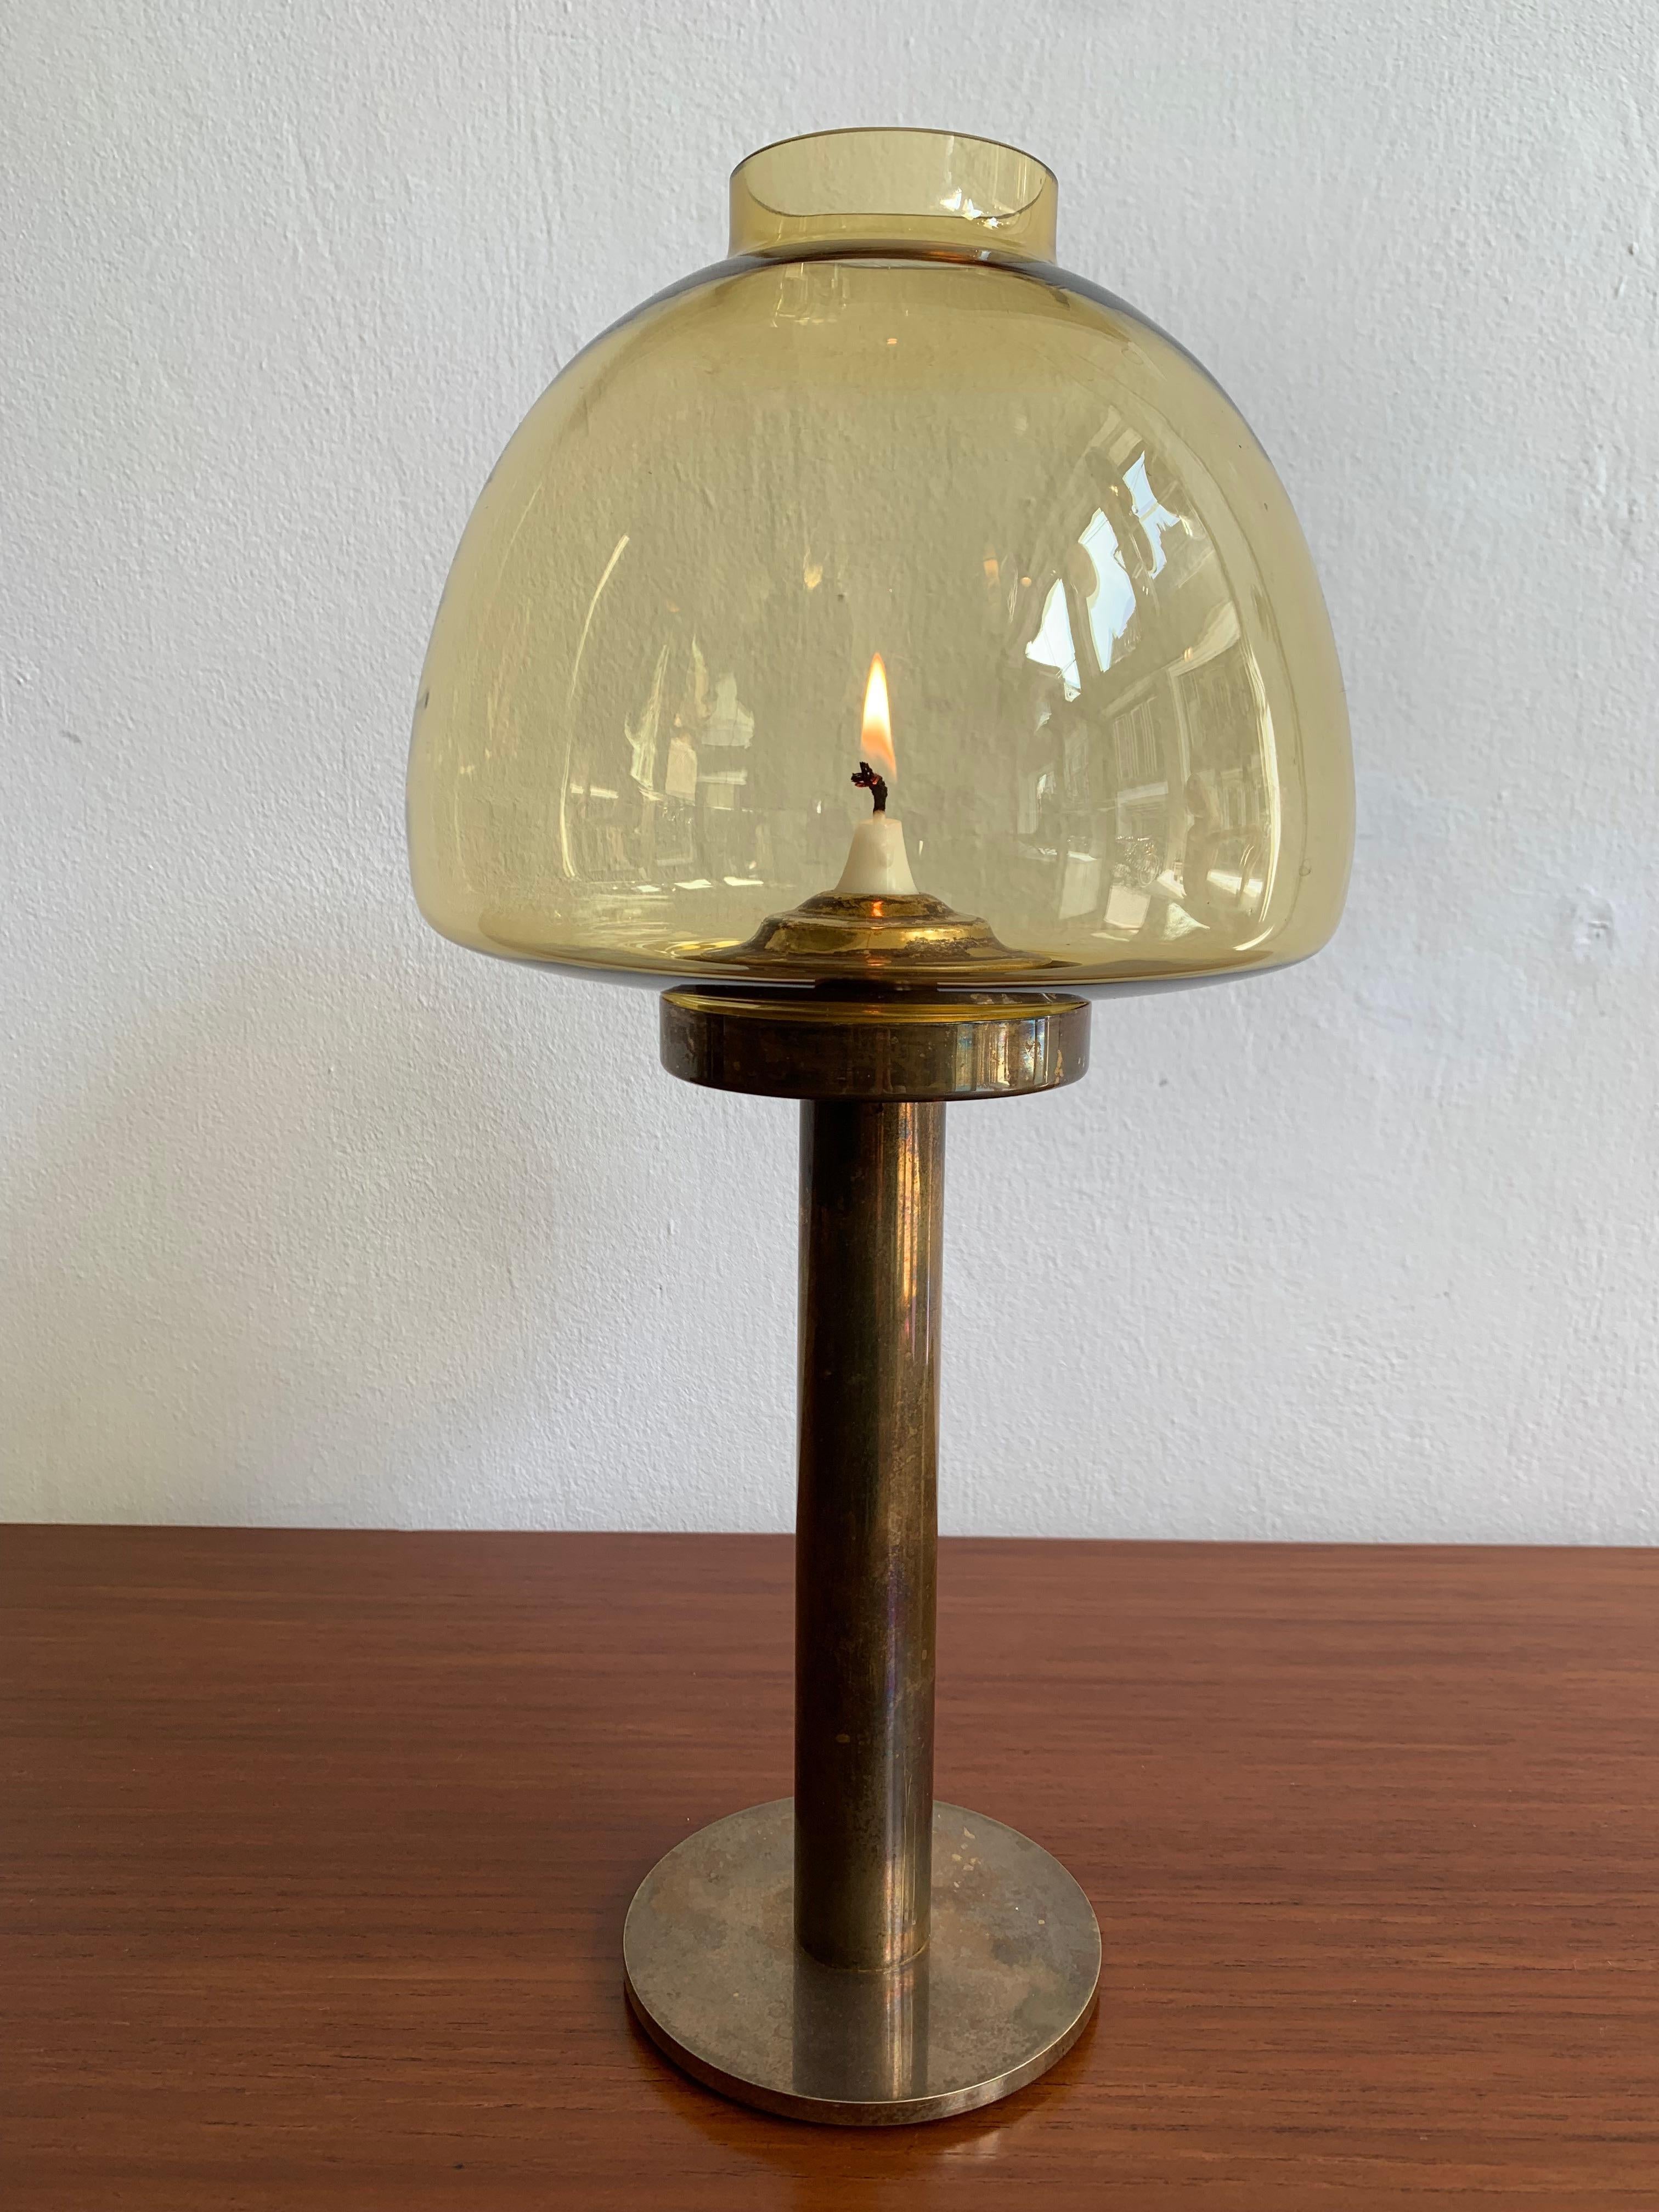 Hurricane candle lantern / candle holder model L102/32 by Swedish designer Hans-Agne Jakobsson made from heavy solid brass with ochre-yellow mouth-blown glass shade. 
The candle burns continuously because the brass base interior's are executed with